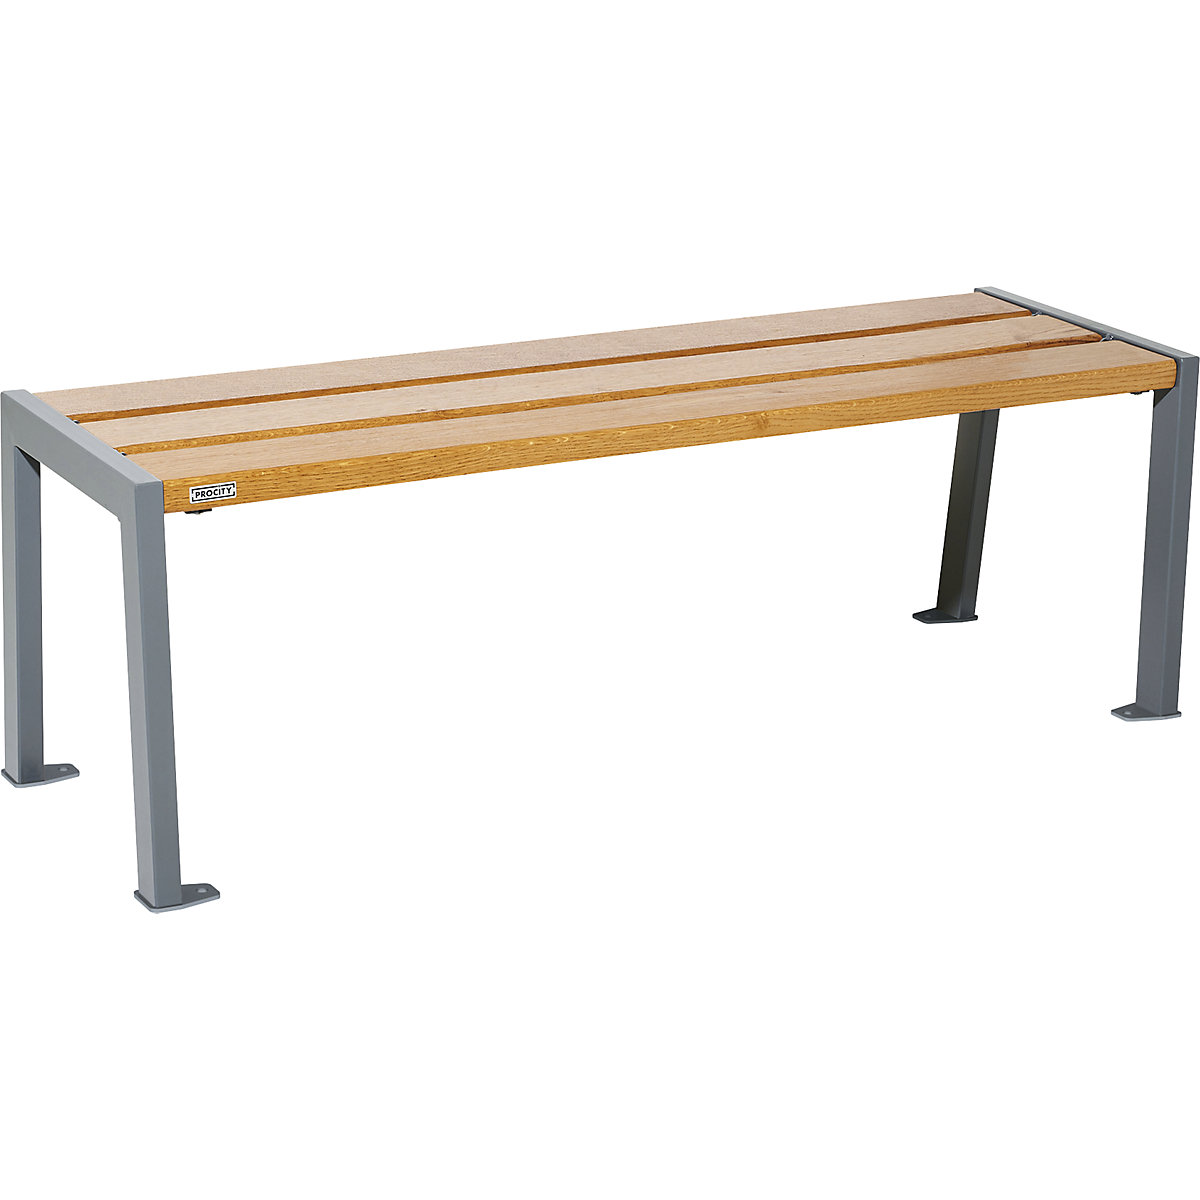 SILAOS® wooden bench without back rest – PROCITY, height 437 mm, length 1200 mm, charcoal, light oak finish-8